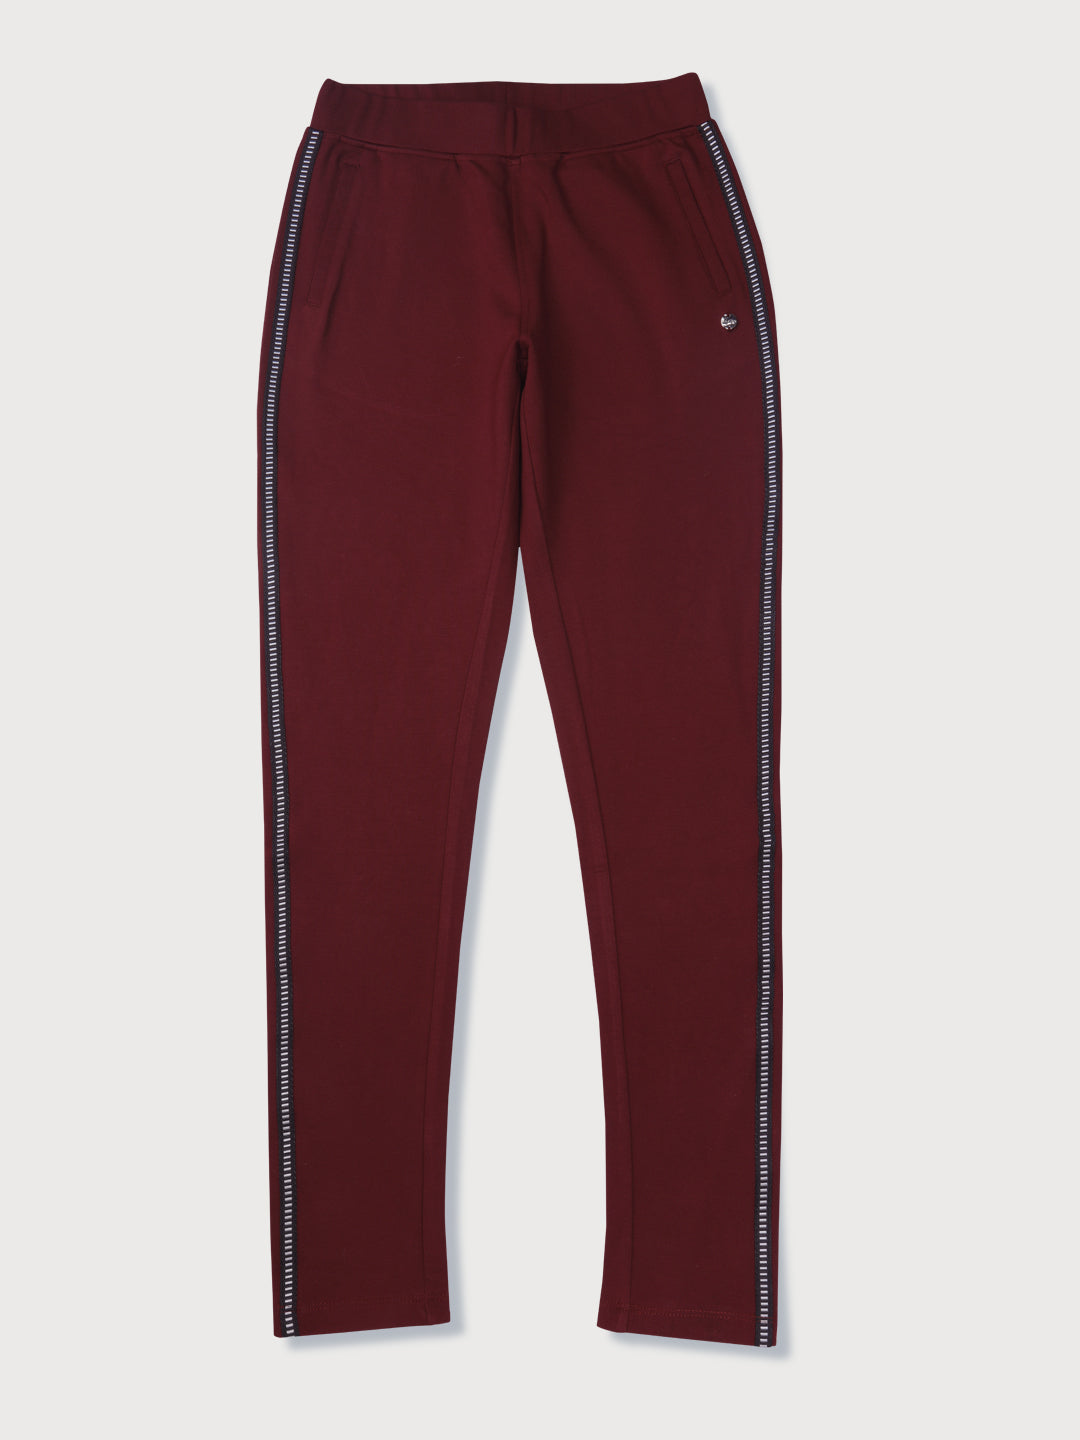 Girls Maroon Knits Solid Jeggings